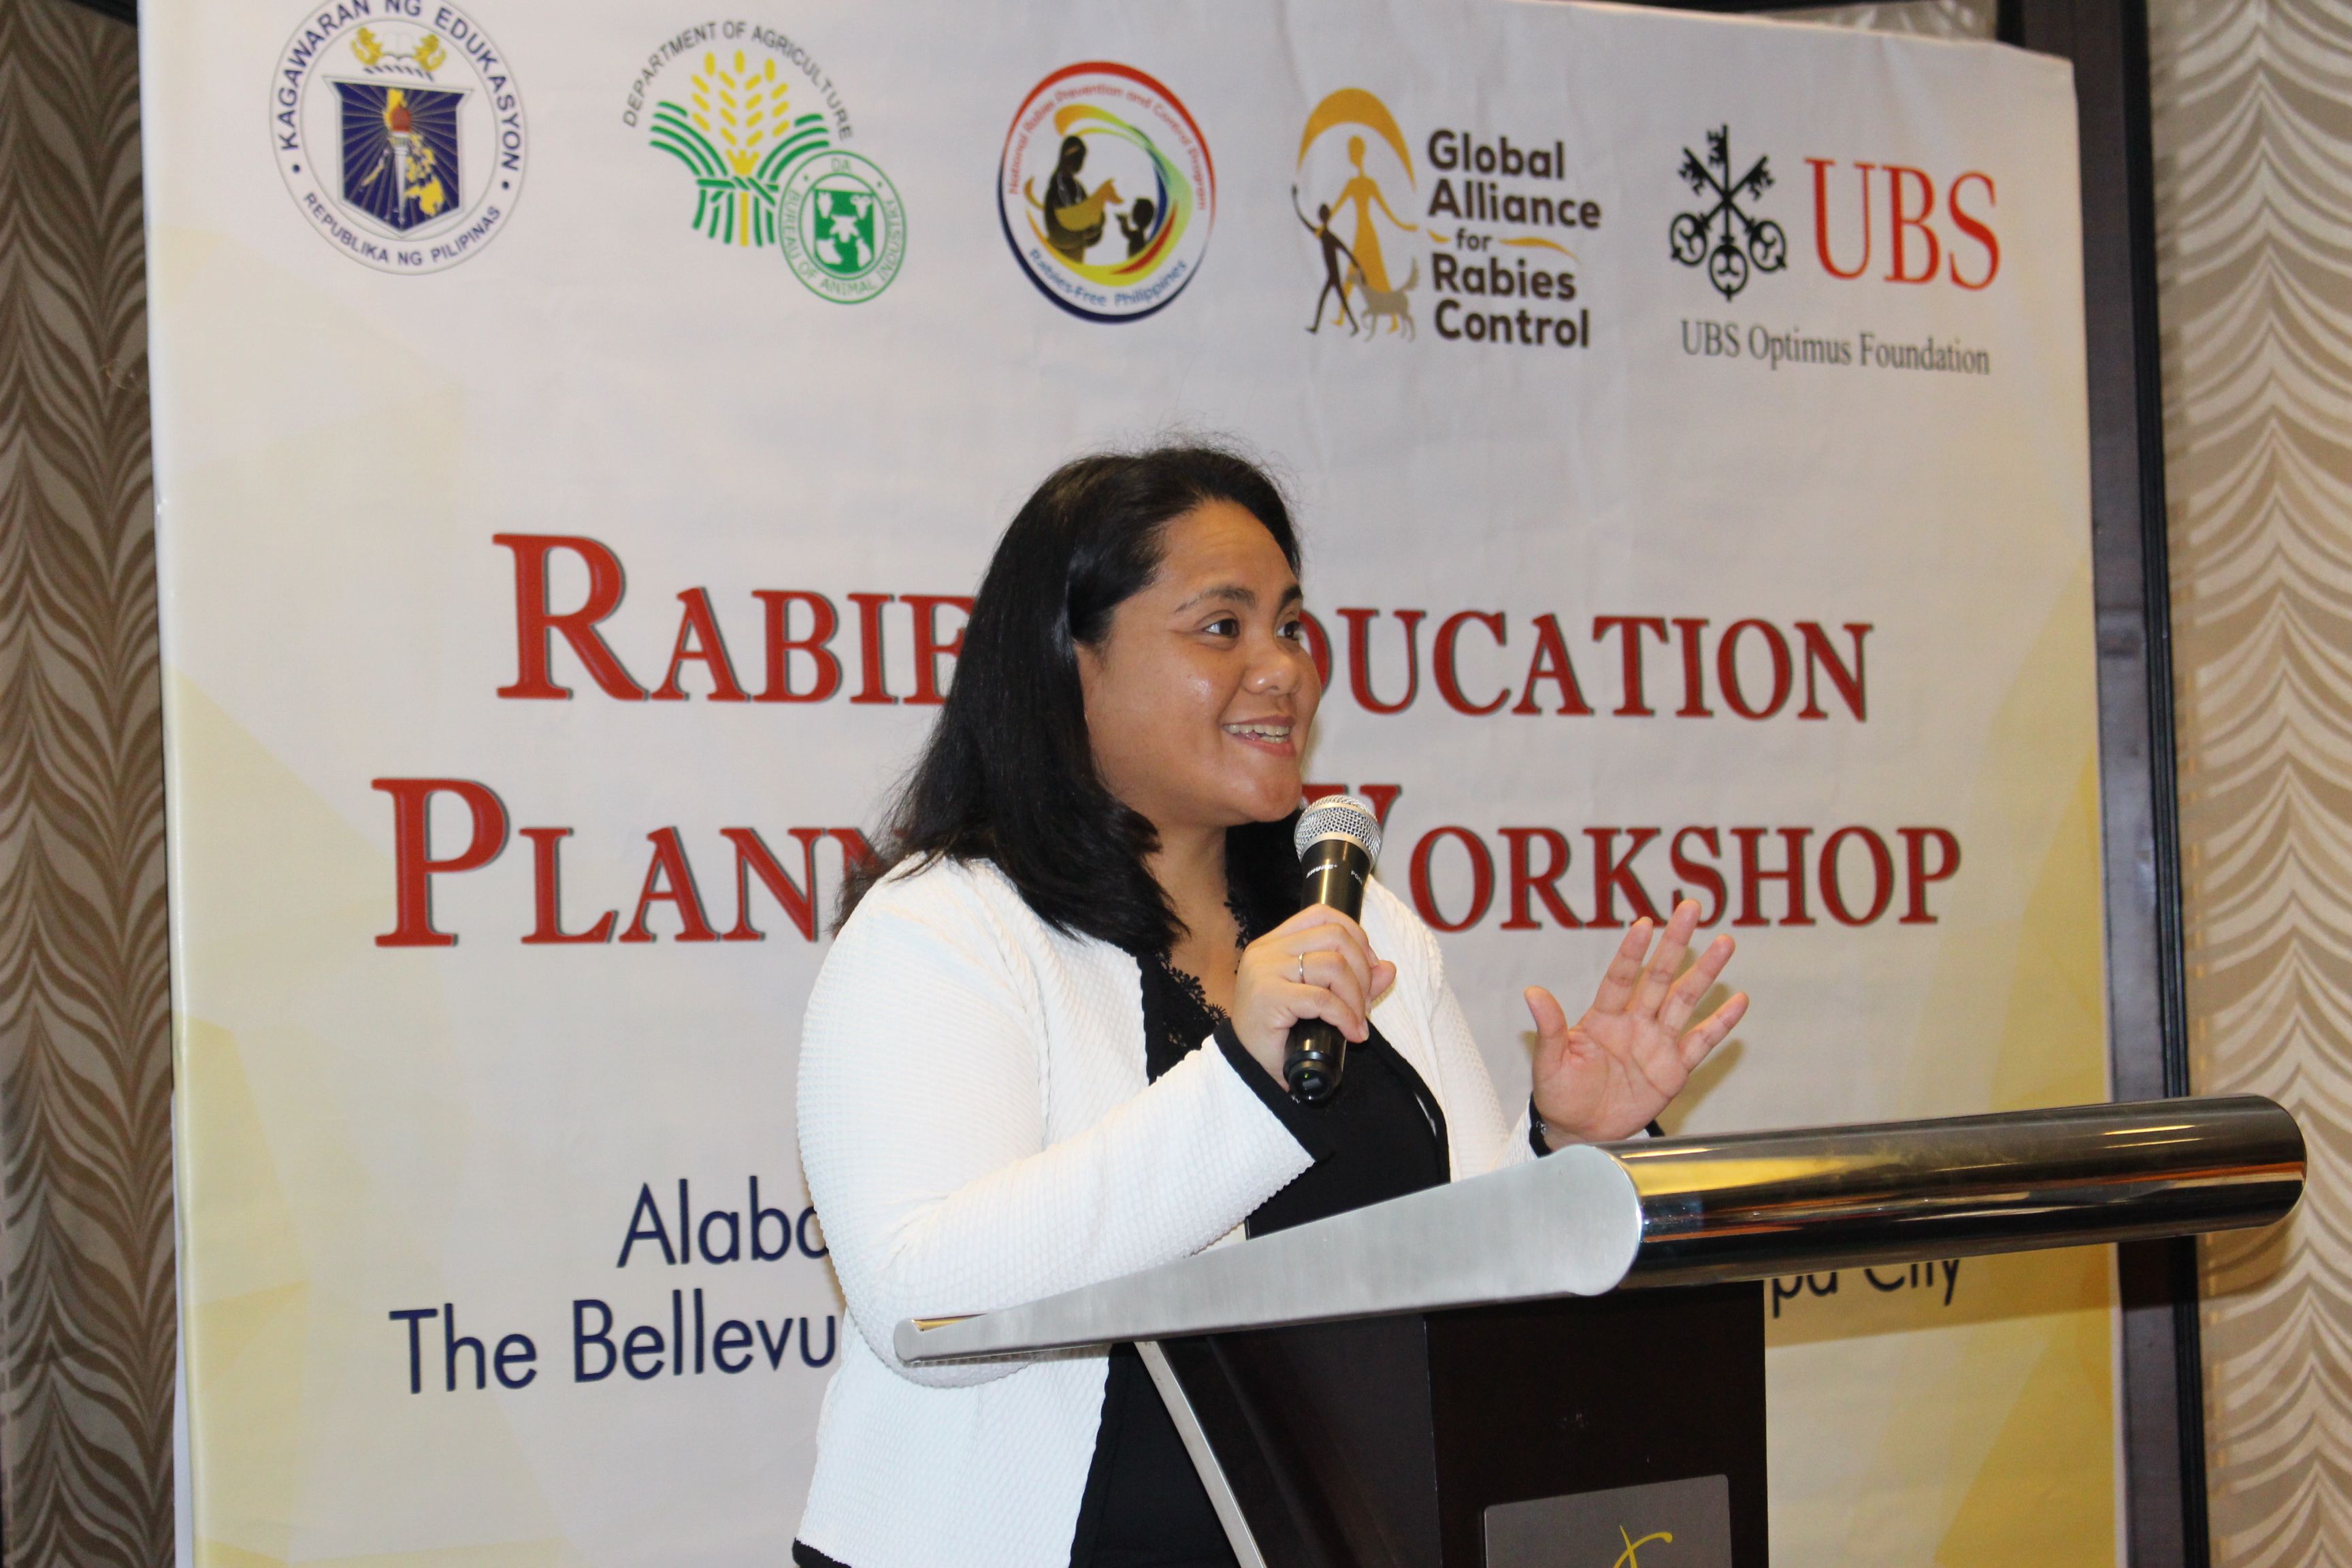 Dr Sarah Jayme presents during a rabies education workshop in the Philippines.